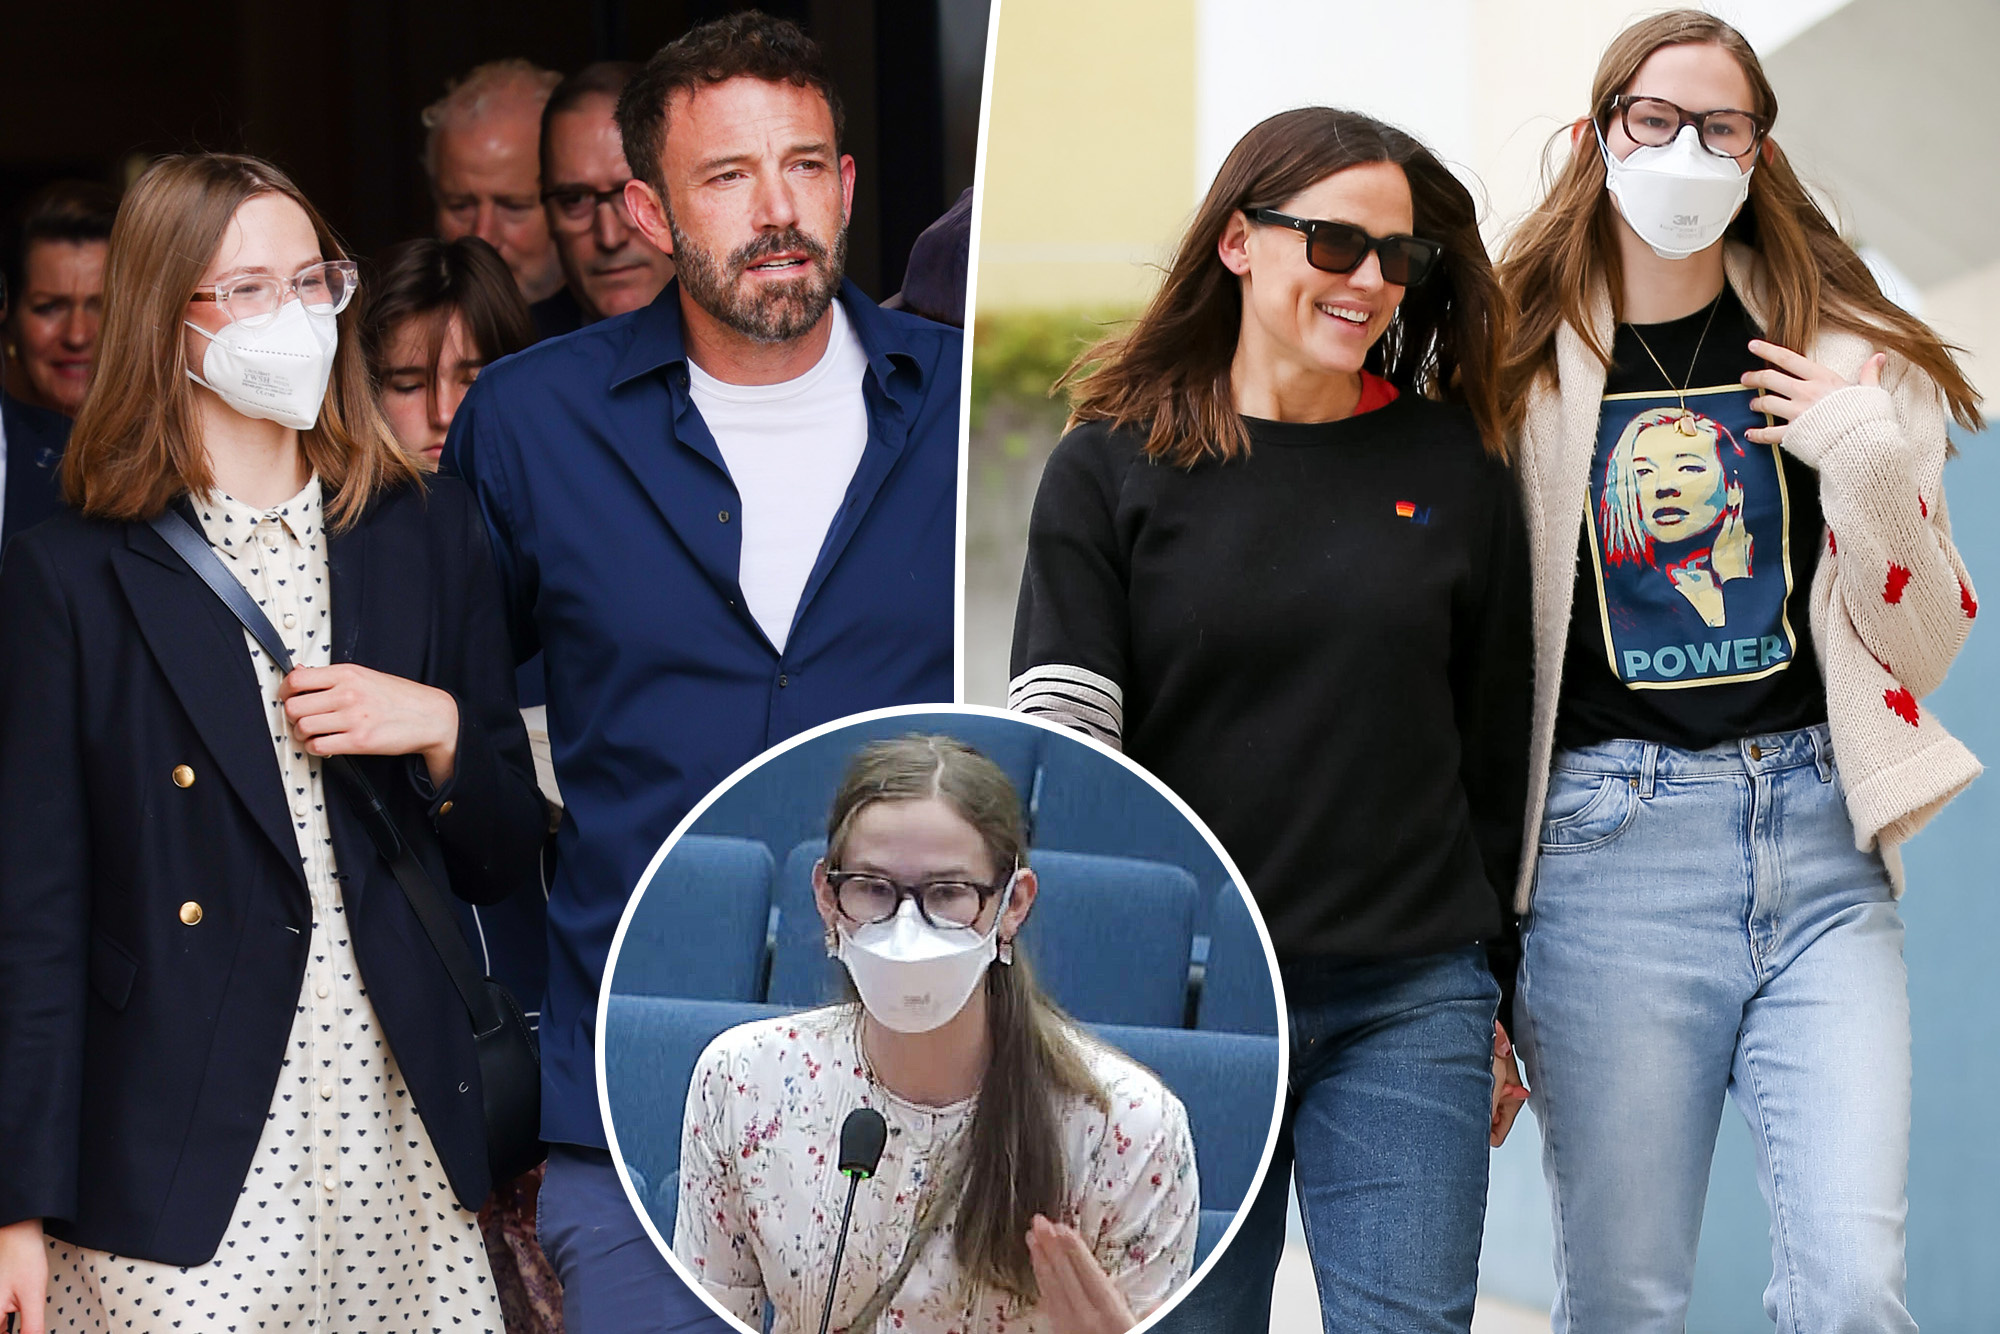 Violet Affleck Stands Up for Masks: A Teen's Powerful Message for Health